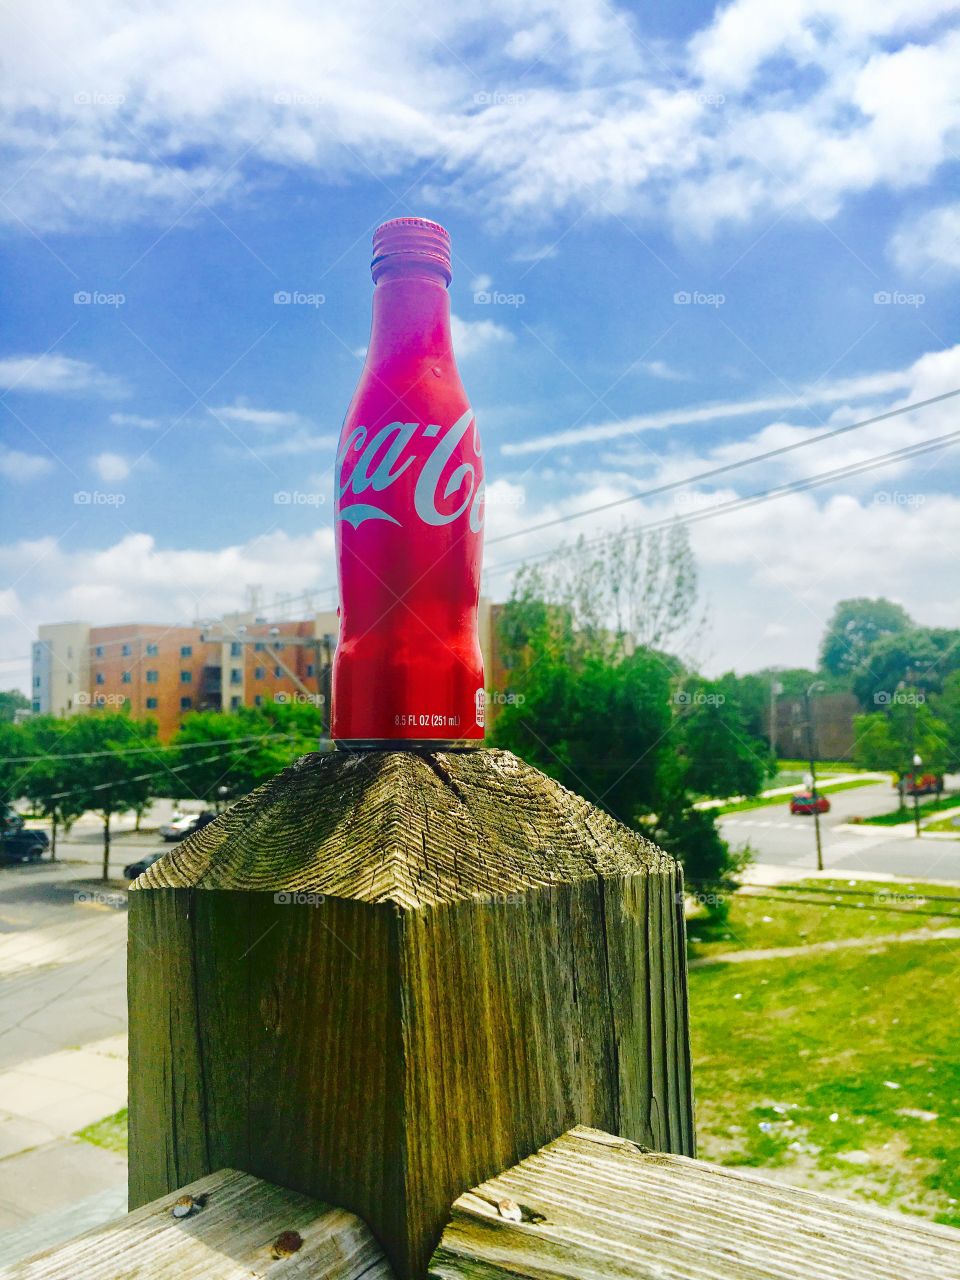 Coca-Cola ® Bottle from World of Coca Cola ®